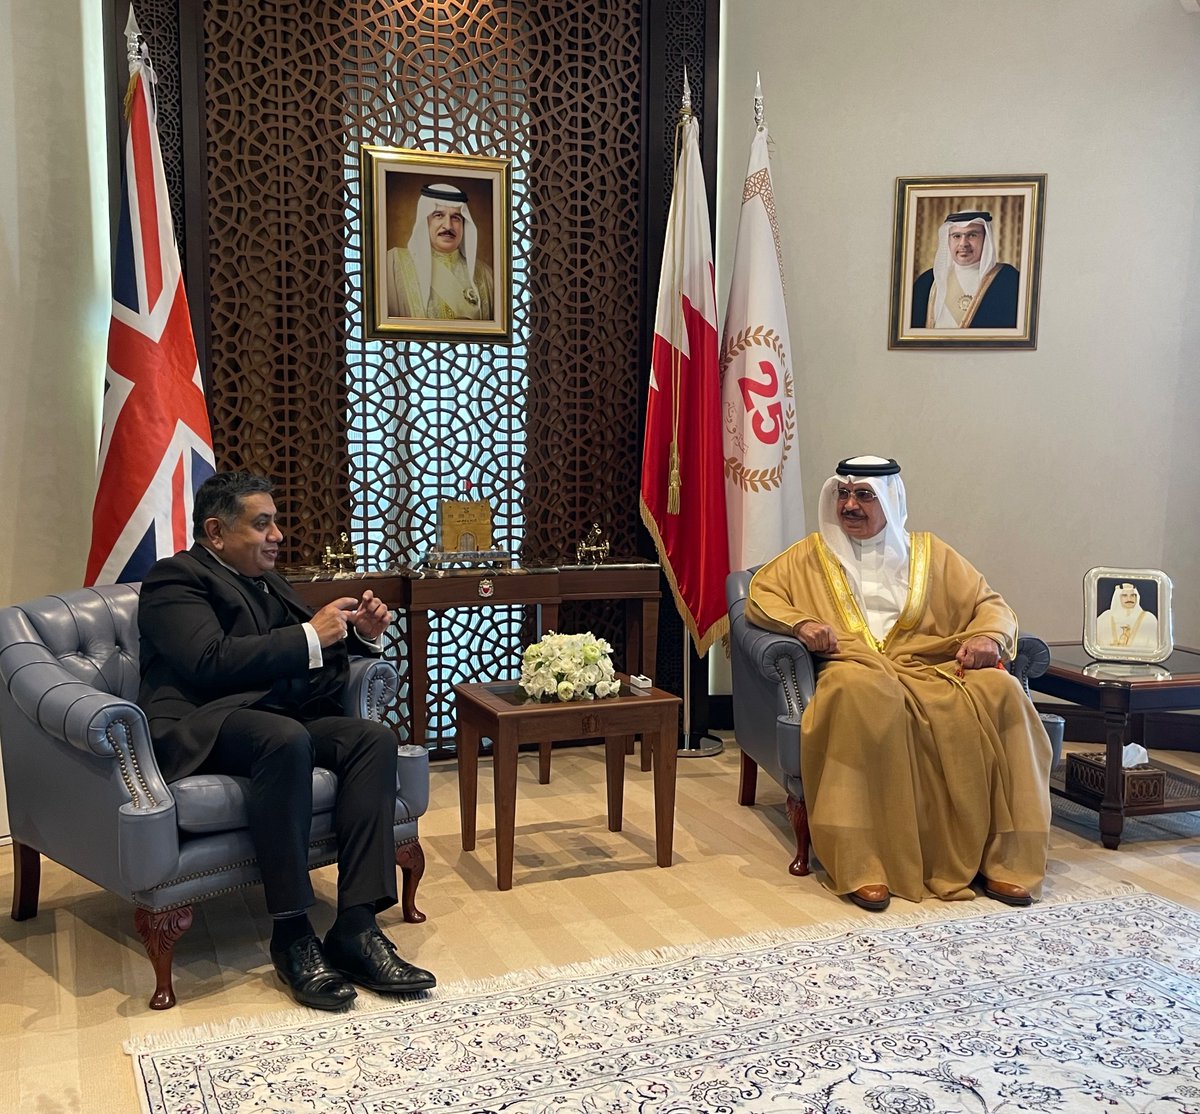 Good to meet HE Sheikh Rashid Al Khalifa. We had a constructive discussion on Bahrain’s positive progress in security and justice in recent years. The UK looks forward to supporting further initiatives with our close partner and friend 🇬🇧🇧🇭 @moi_bahrain @UKinBahrain